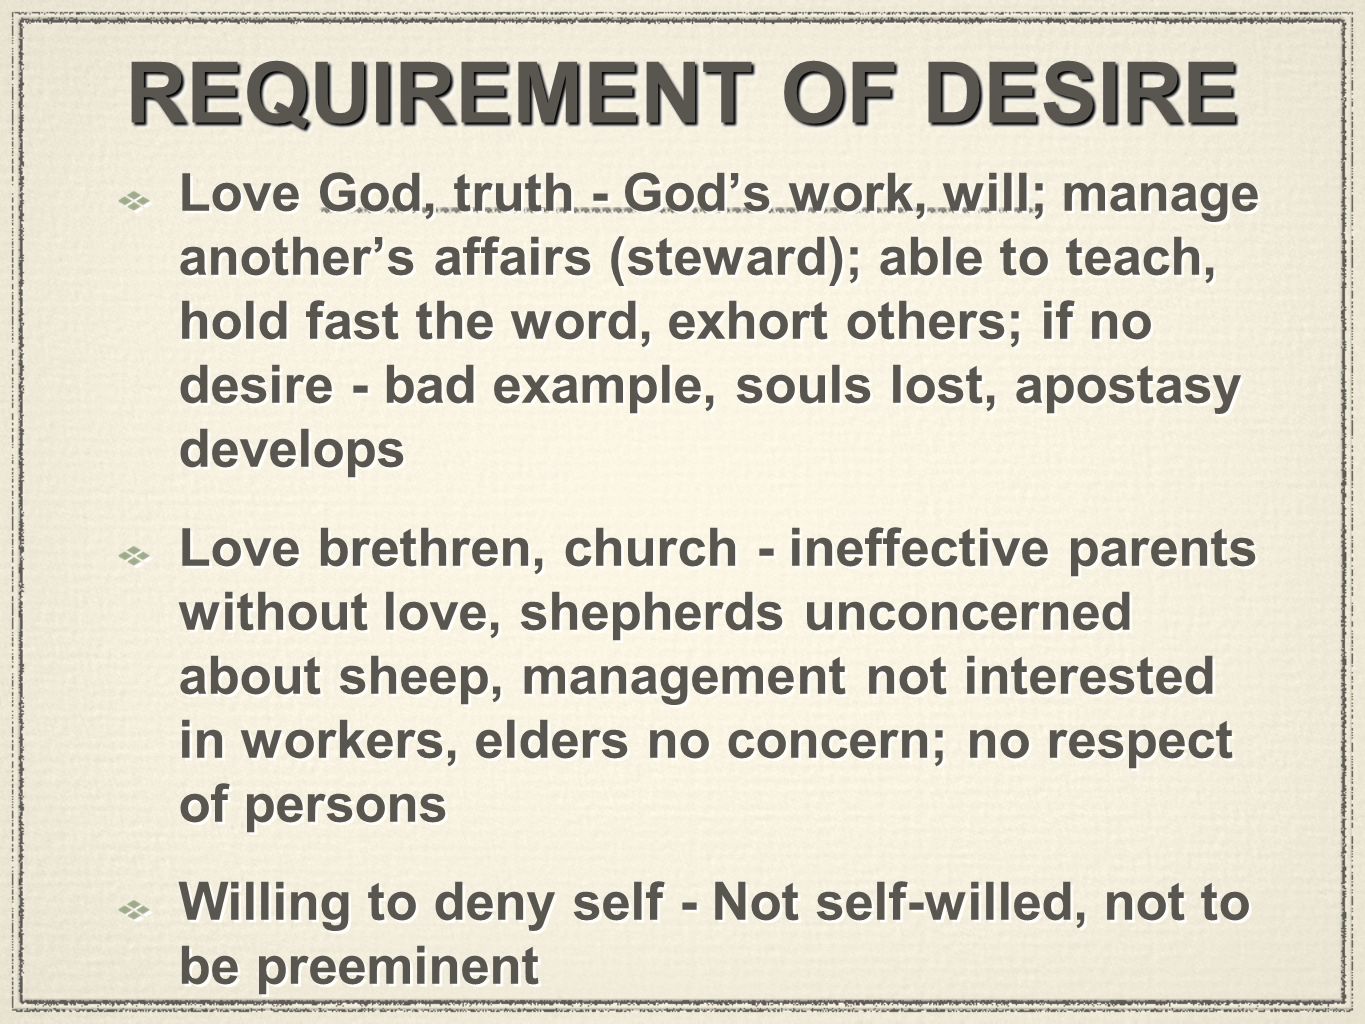 REQUIREMENT OF DESIRE Love God, truth - God’s work, will; manage another’s affairs (steward); able to teach, hold fast the word, exhort others; if no desire - bad example, souls lost, apostasy develops Love brethren, church - ineffective parents without love, shepherds unconcerned about sheep, management not interested in workers, elders no concern; no respect of persons Willing to deny self - Not self-willed, not to be preeminent Love God, truth - God’s work, will; manage another’s affairs (steward); able to teach, hold fast the word, exhort others; if no desire - bad example, souls lost, apostasy develops Love brethren, church - ineffective parents without love, shepherds unconcerned about sheep, management not interested in workers, elders no concern; no respect of persons Willing to deny self - Not self-willed, not to be preeminent